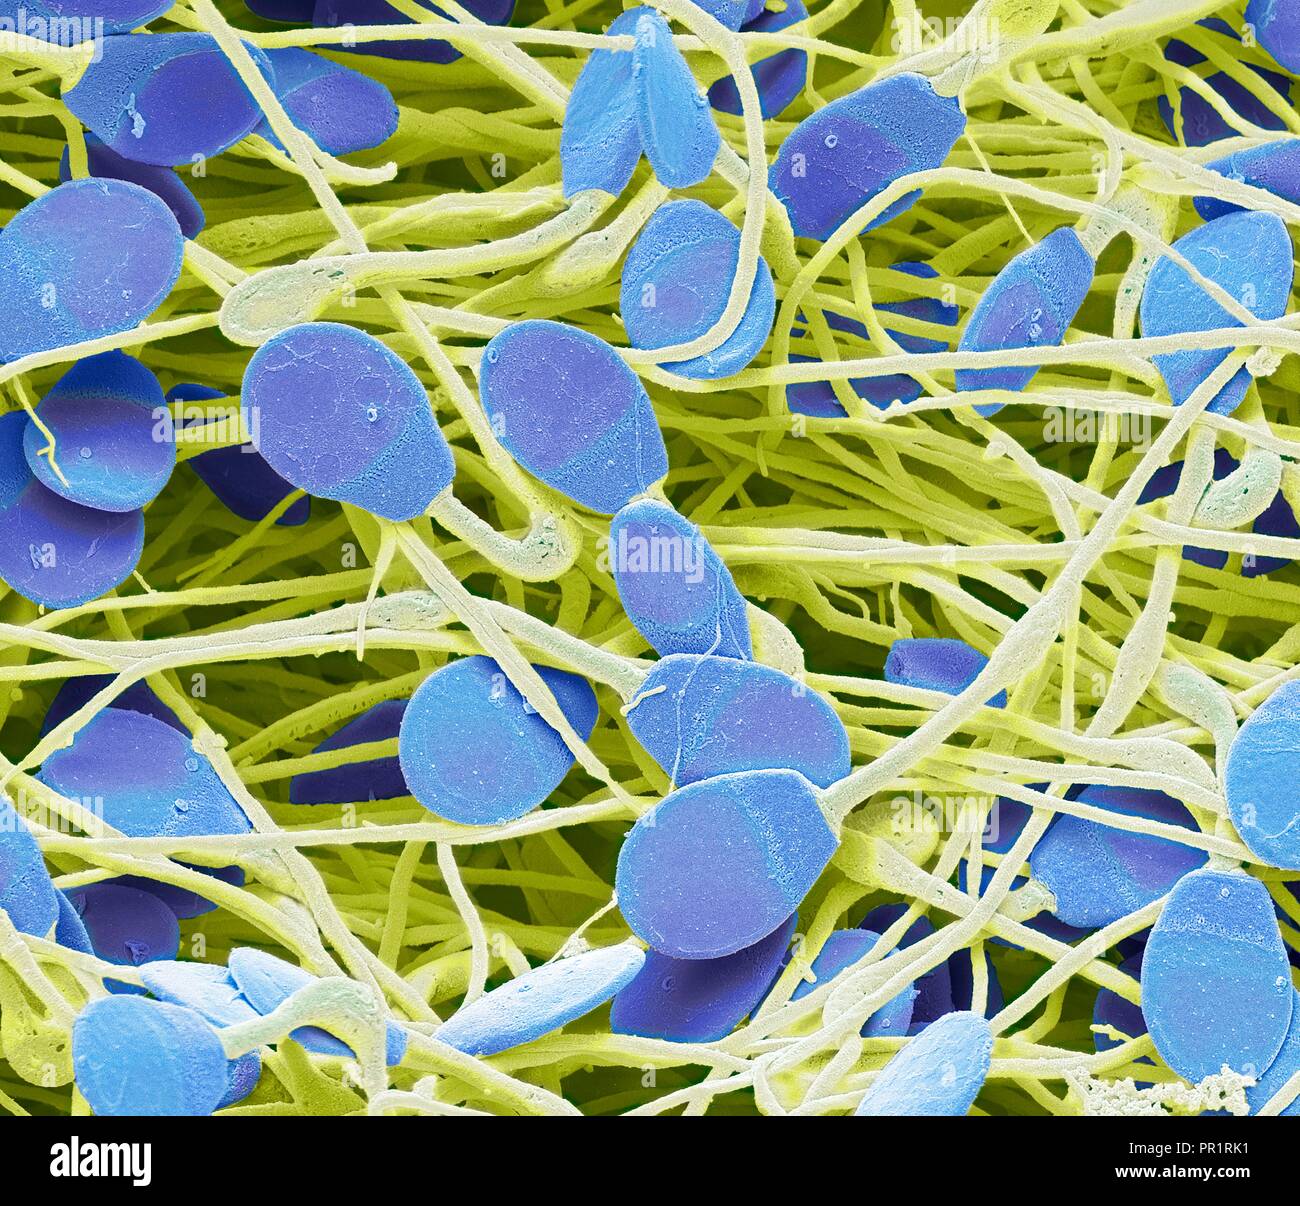 Pig sperm. Coloured scanning electron micrograph (SEM) of immature pig sperm from the epididymis. This immature sperm is characterised by a small amount of unshed residual cytoplasm below the head. The epididymis is a 7 metre long coiled tube that lies behind each testis, receiving sperm from them. The sperm mature as they pass slowly through this tube. Magnification: x4000 when printed at 10 centimetres wide. Stock Photo